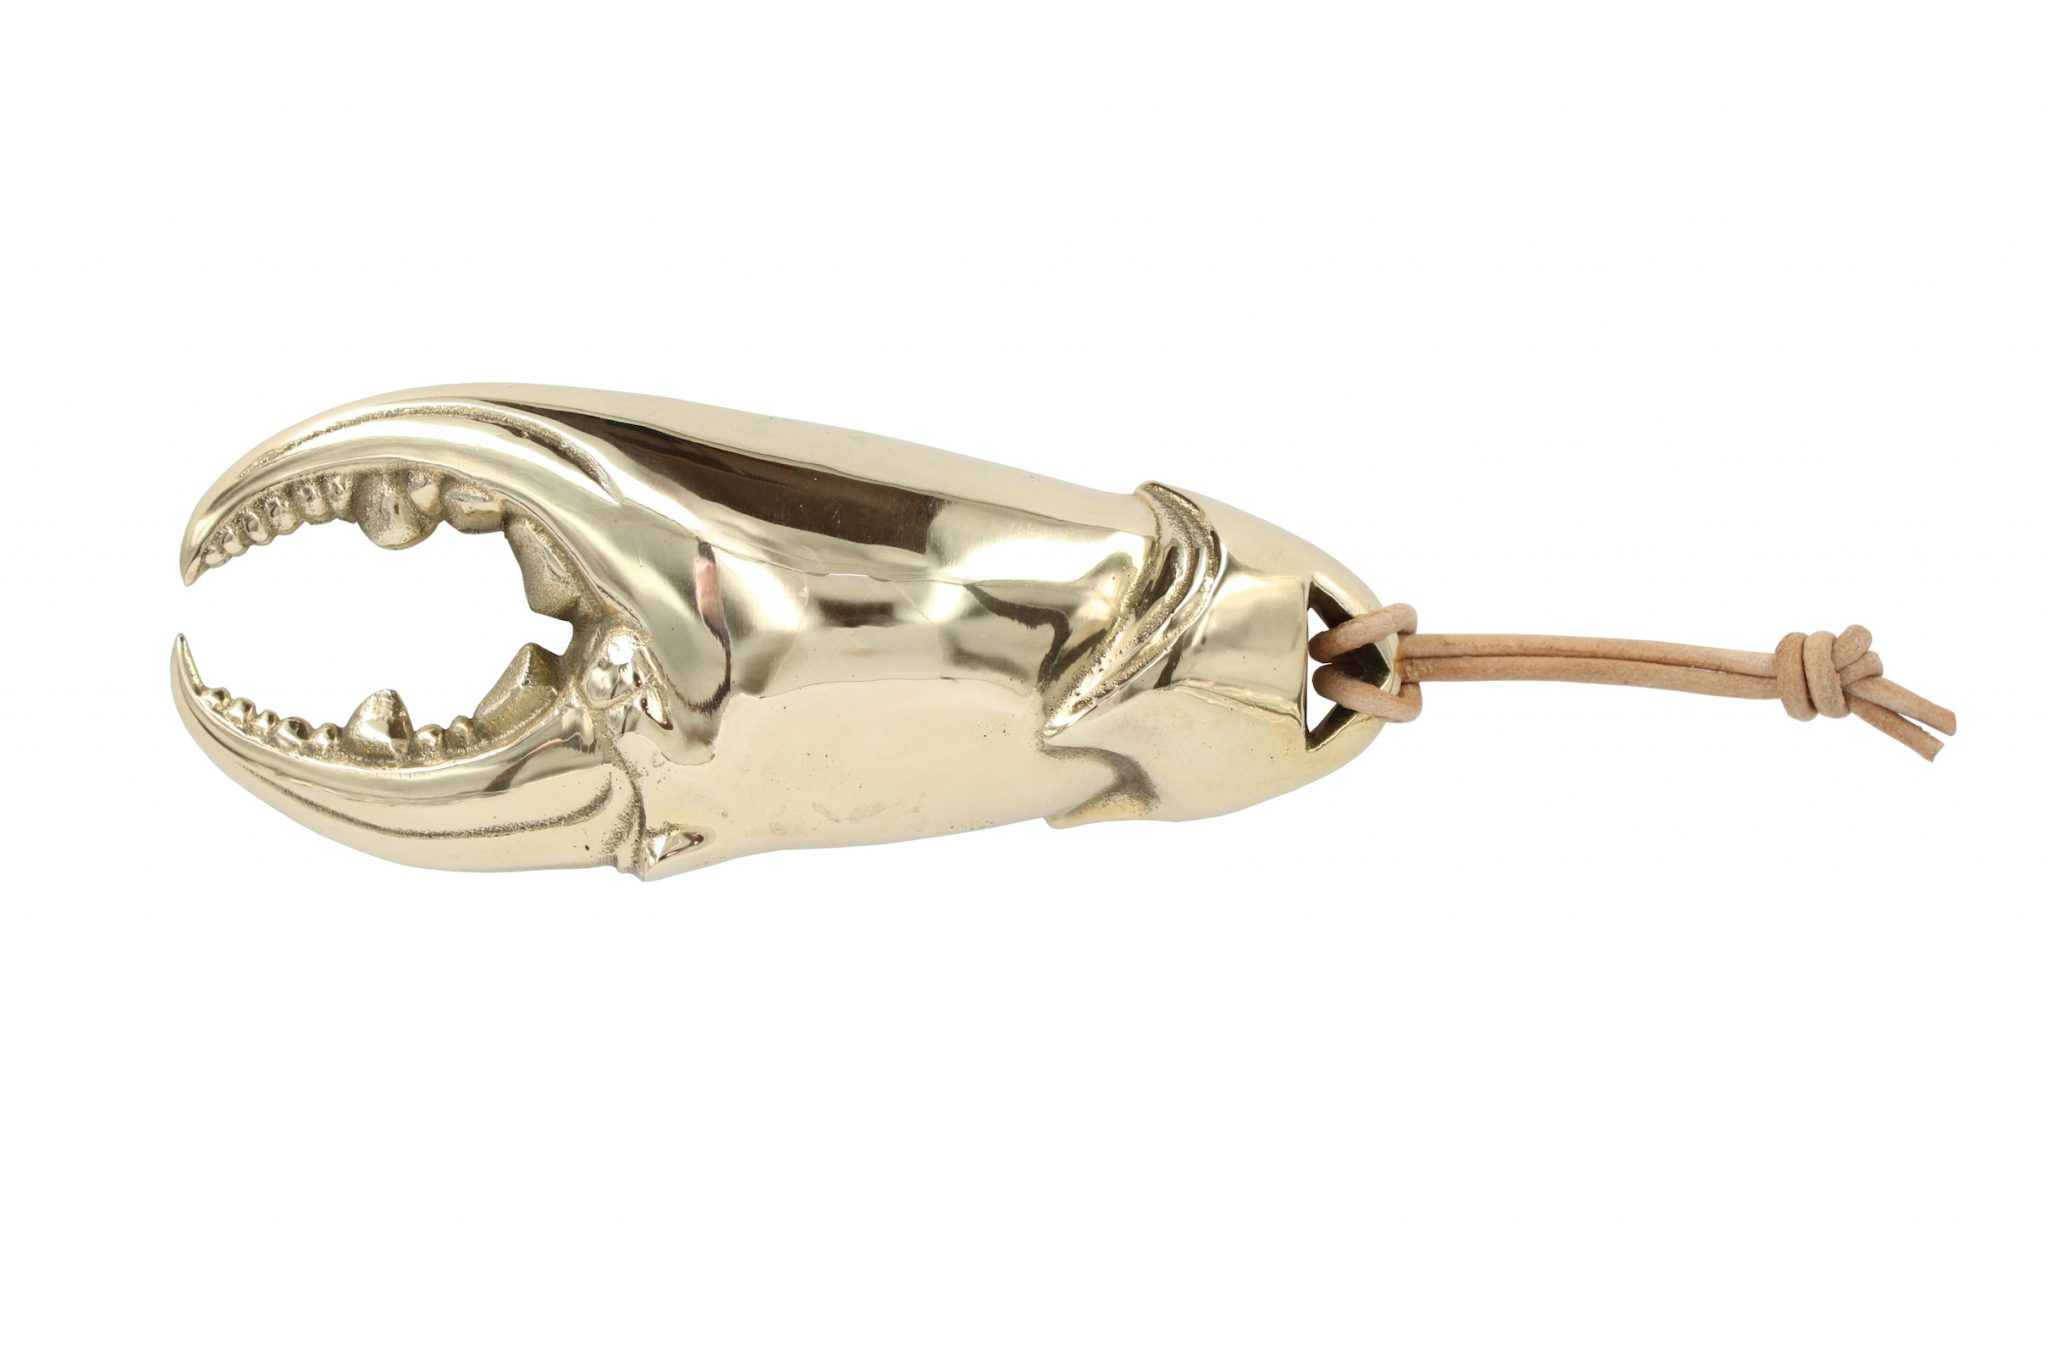 Crab claw bottle opener